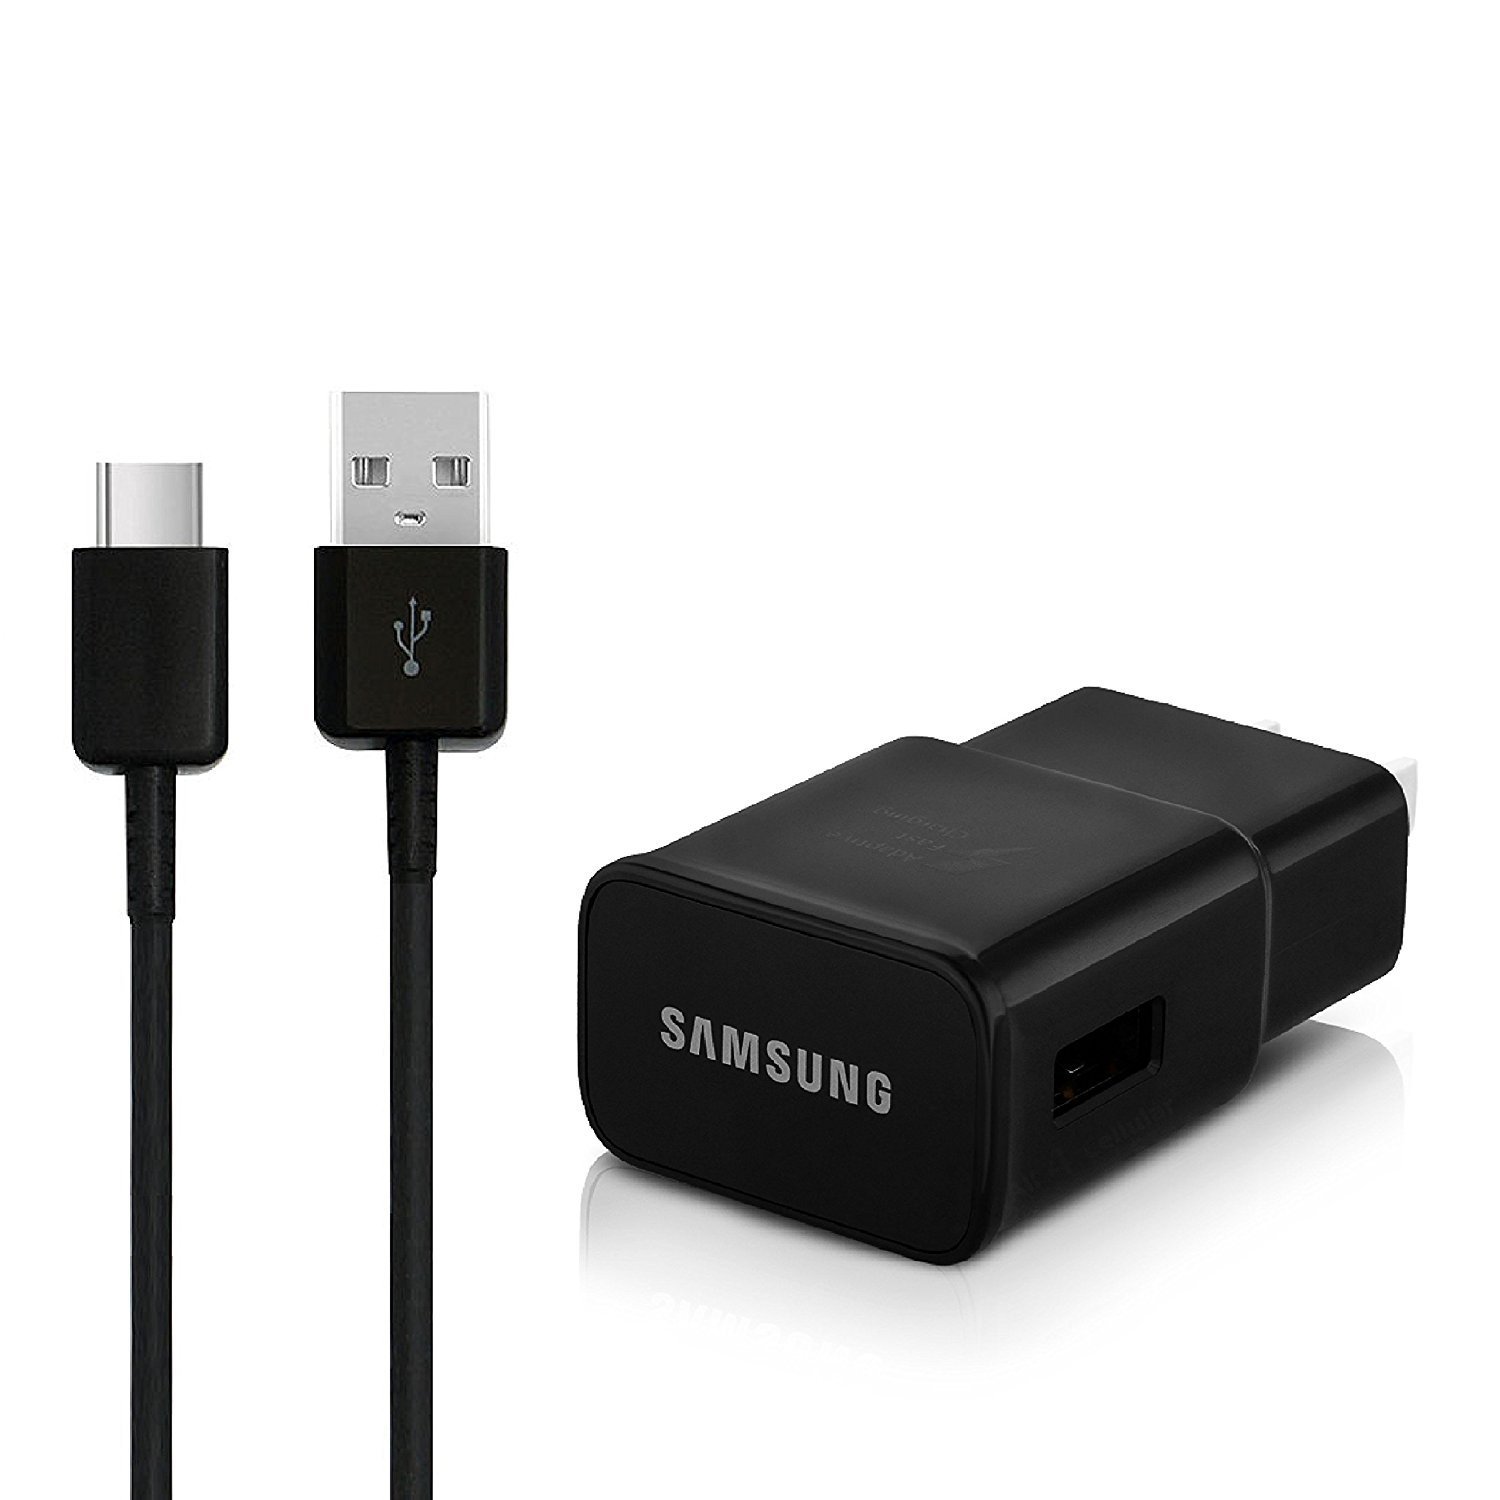 SAMSUNG FAST CHARGER EP-TA20JBE AND USB TYPE C CABLE EP-DG950CBE PARA GALAXY S8